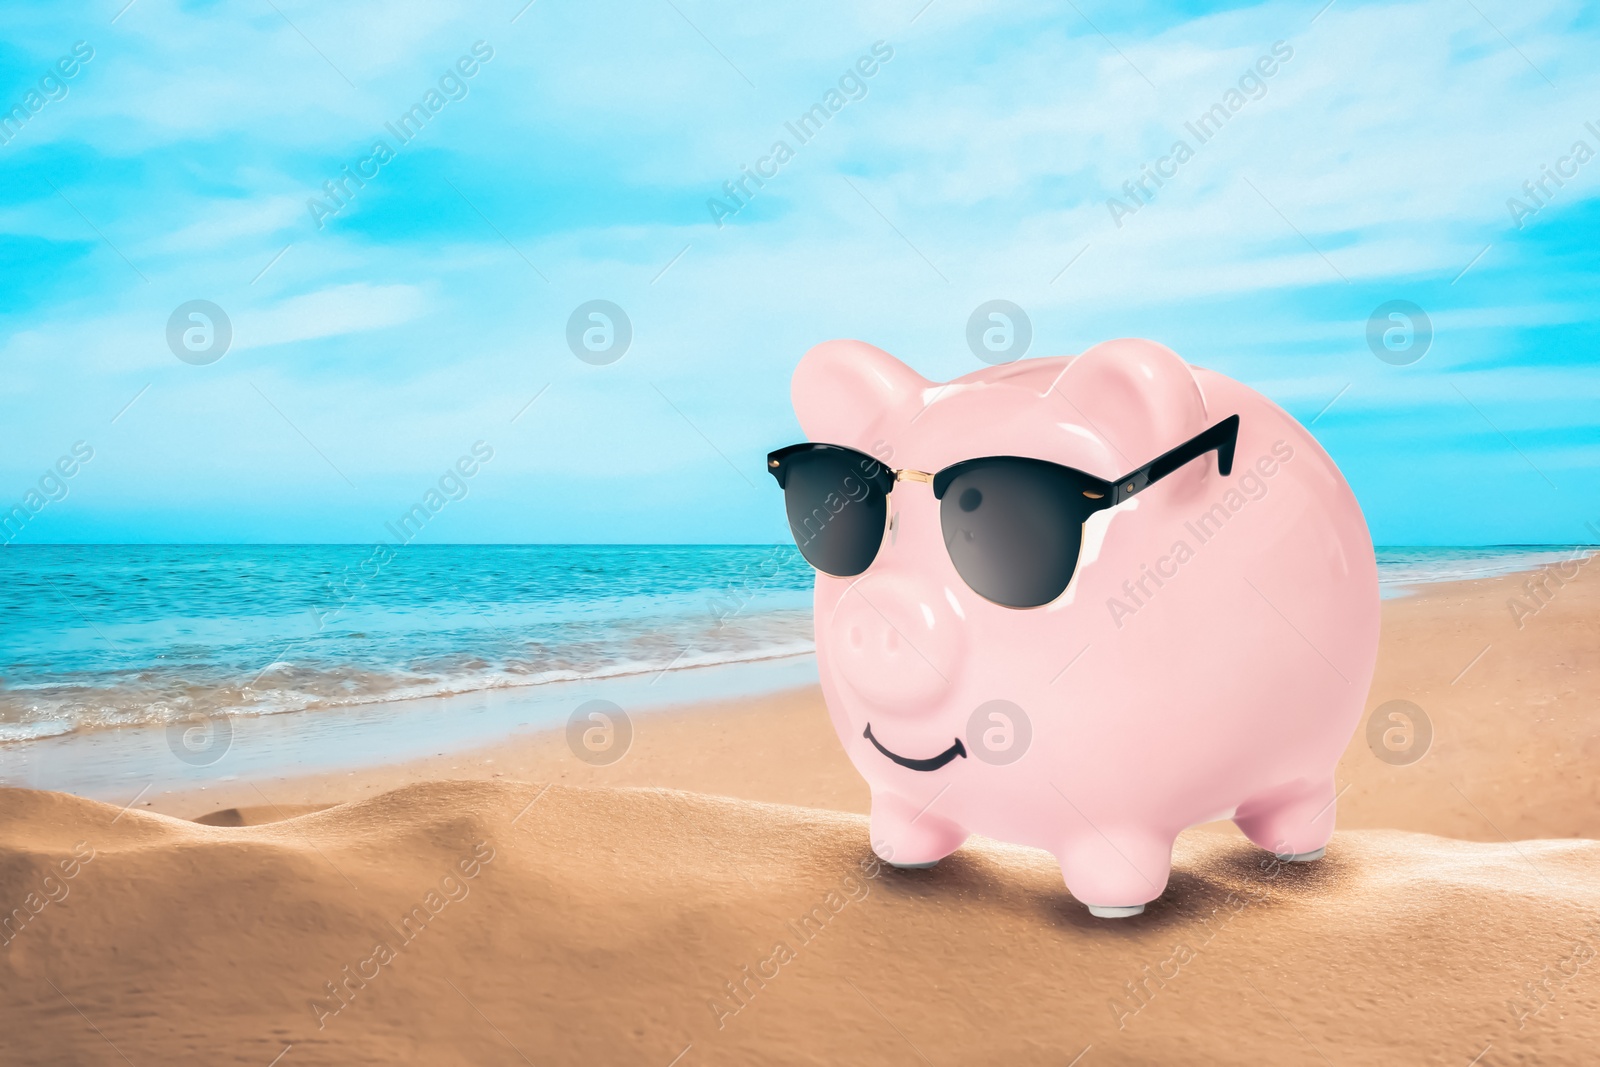 Image of Vacation savings. Piggy bank with sunglasses on sandy beach near sea. Space for text